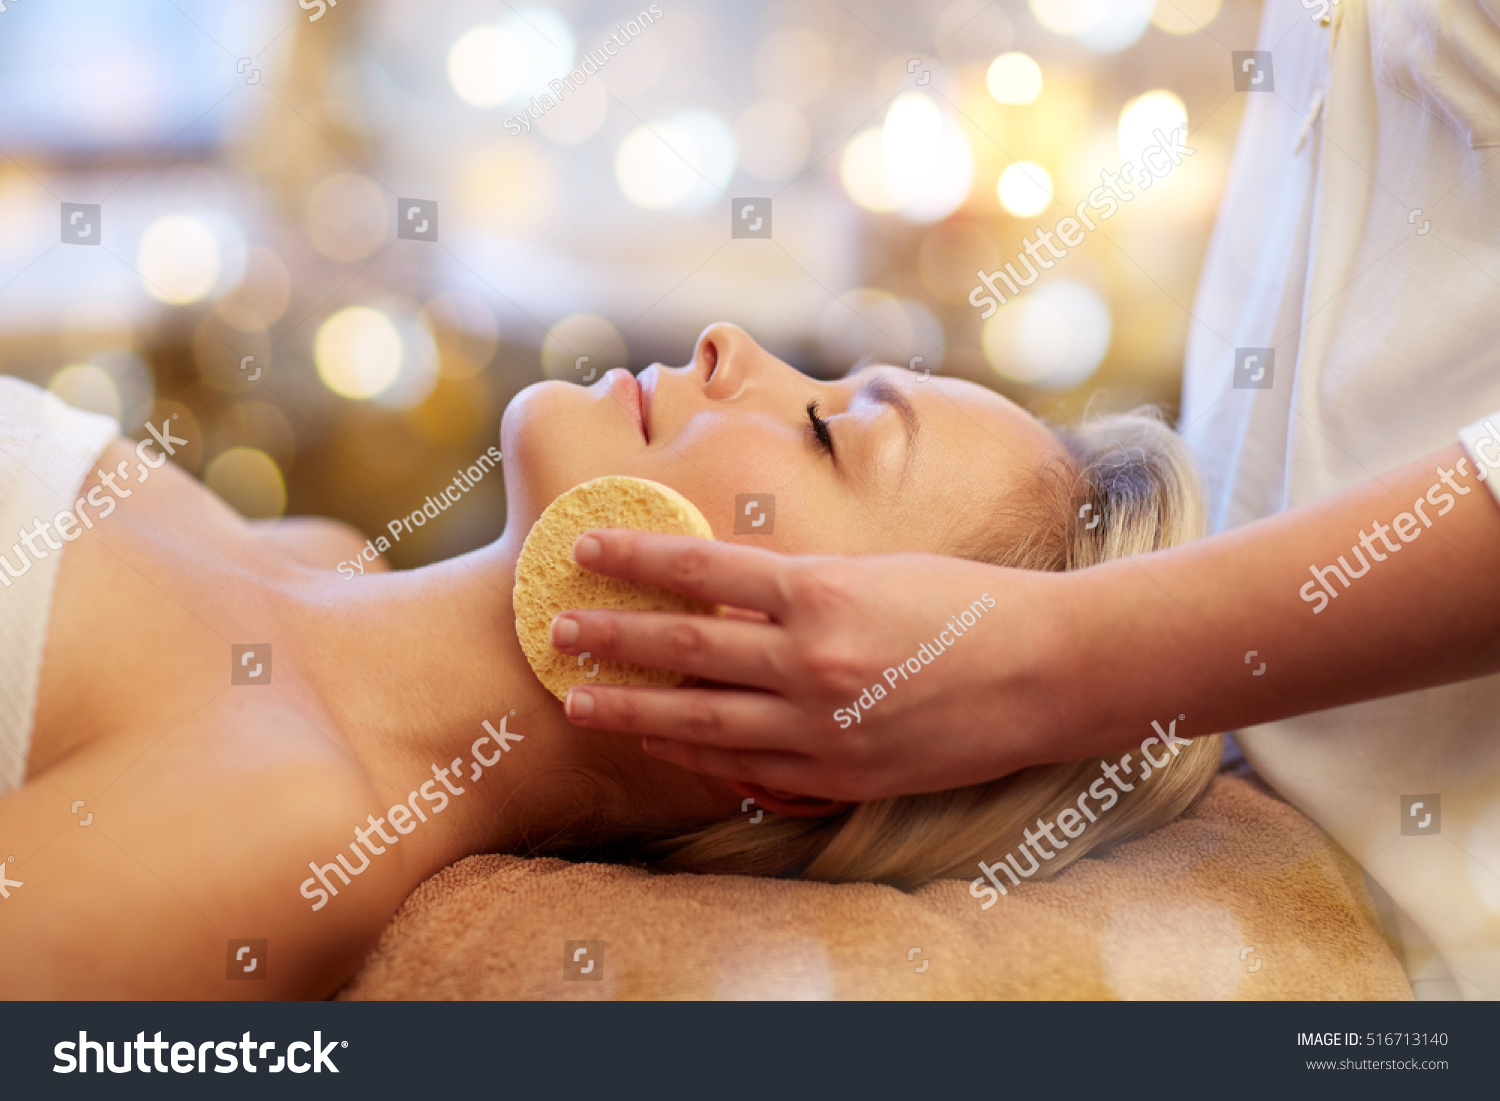 people, beauty, spa, healthy lifestyle and relaxation concept - close up of beautiful young woman lying with closed eyes and having face massage with sponge in spa #516713140